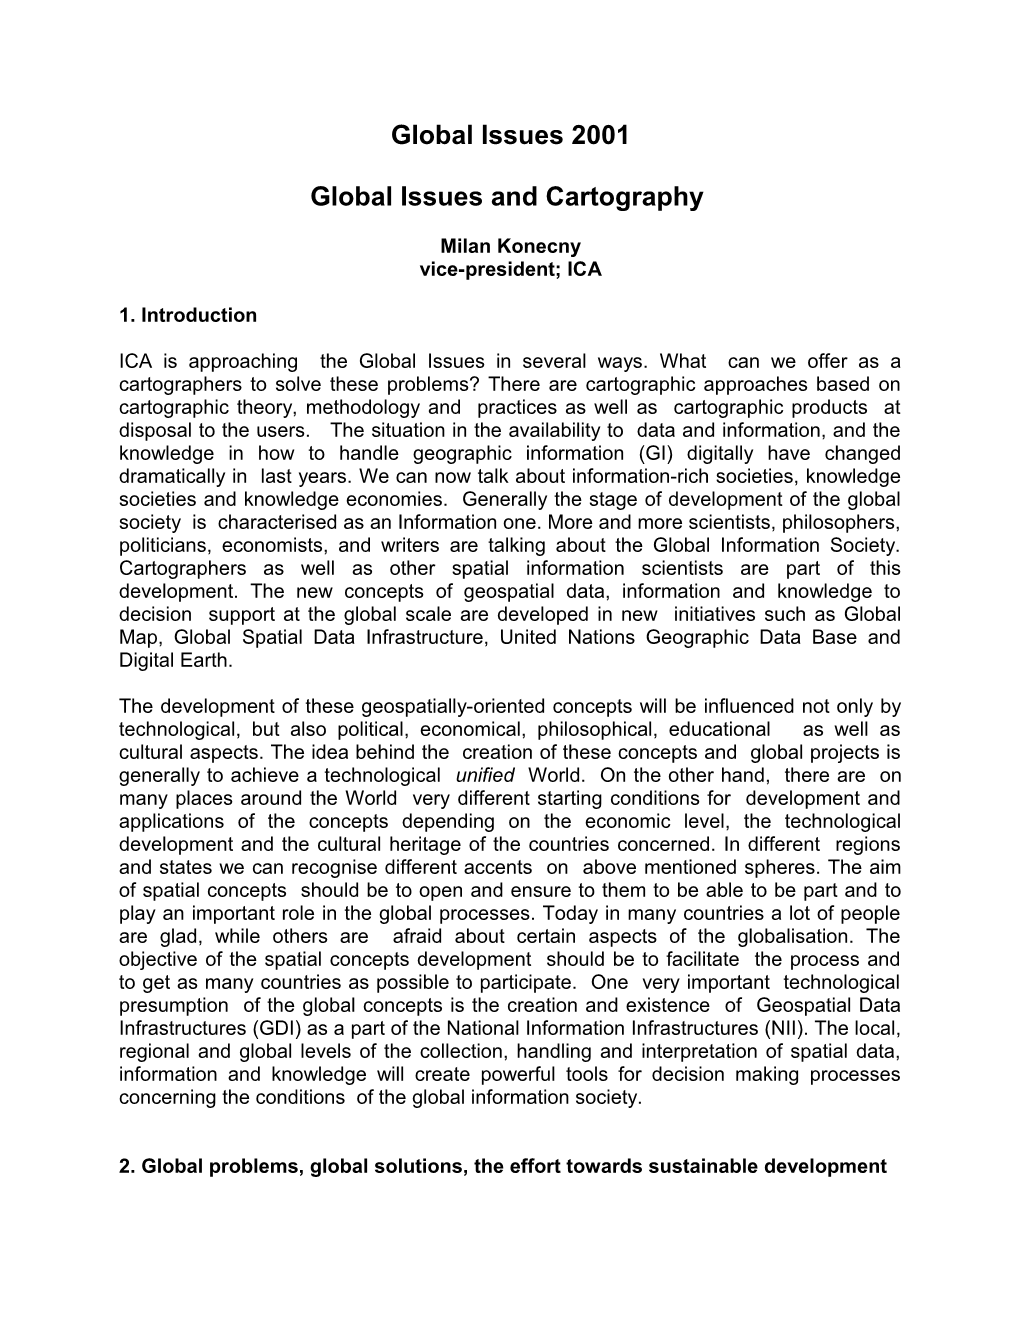 Global Issues and Cartography